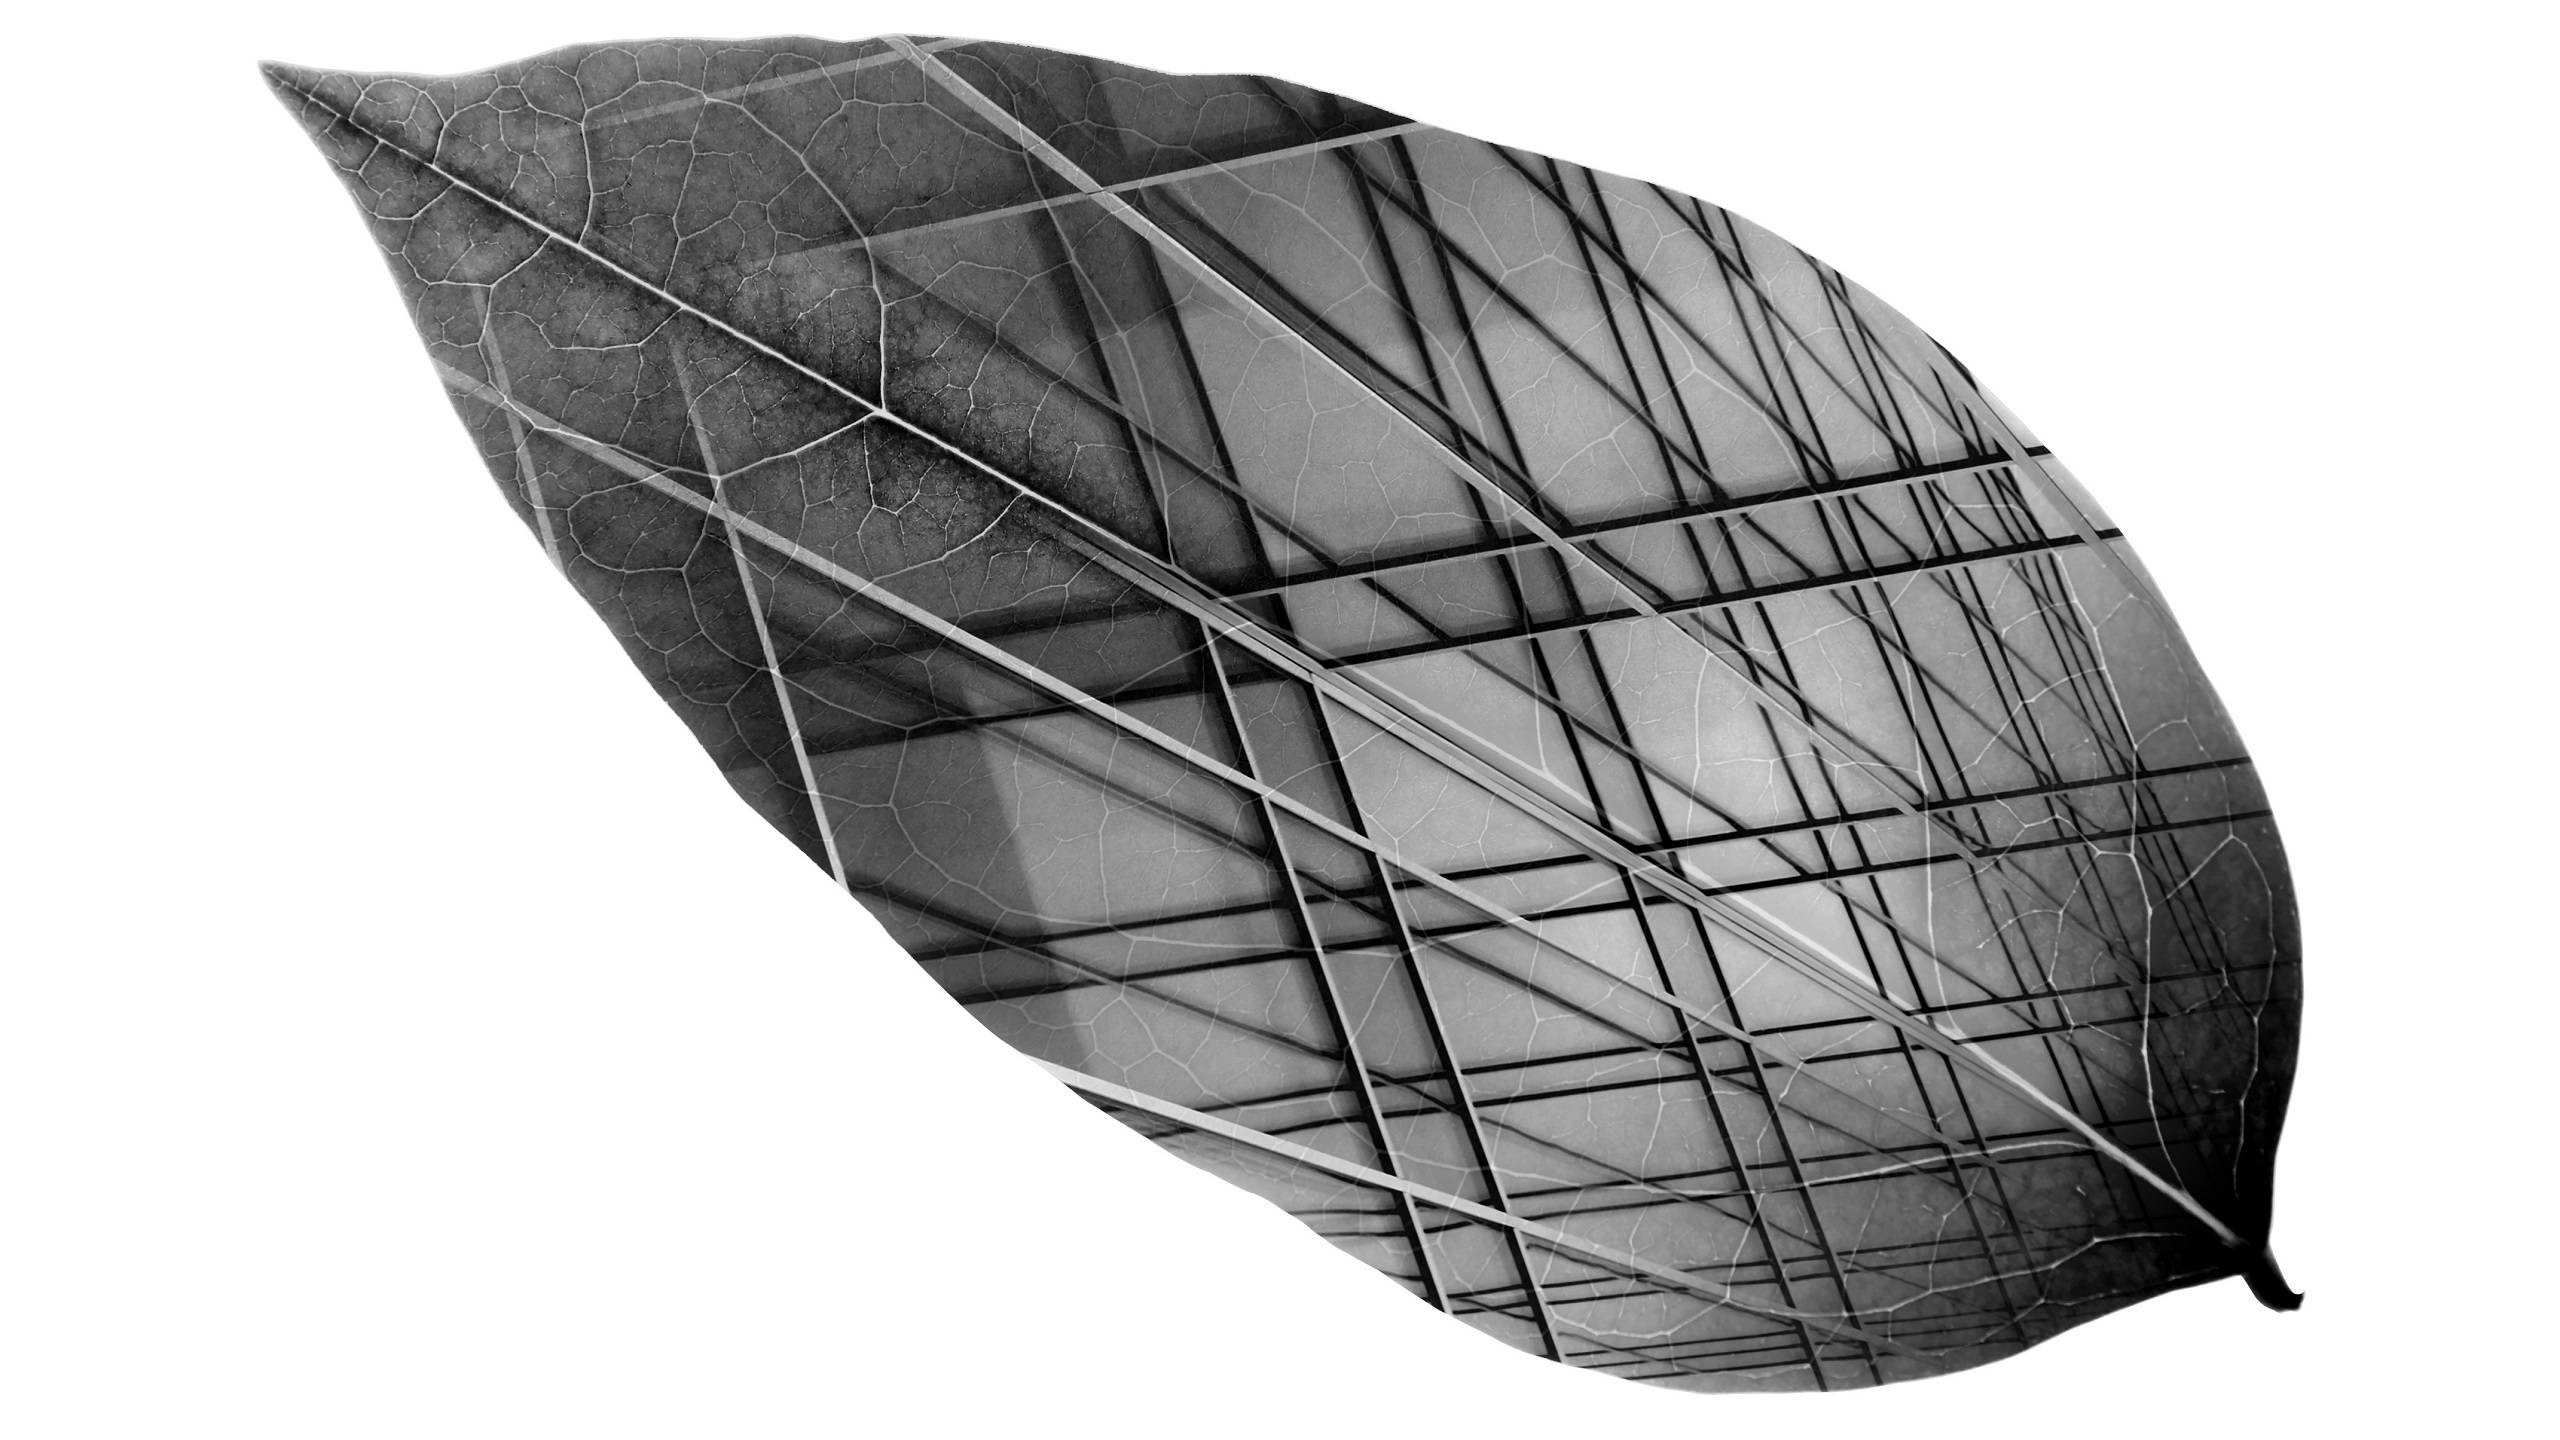 Steel structure in leaf shape